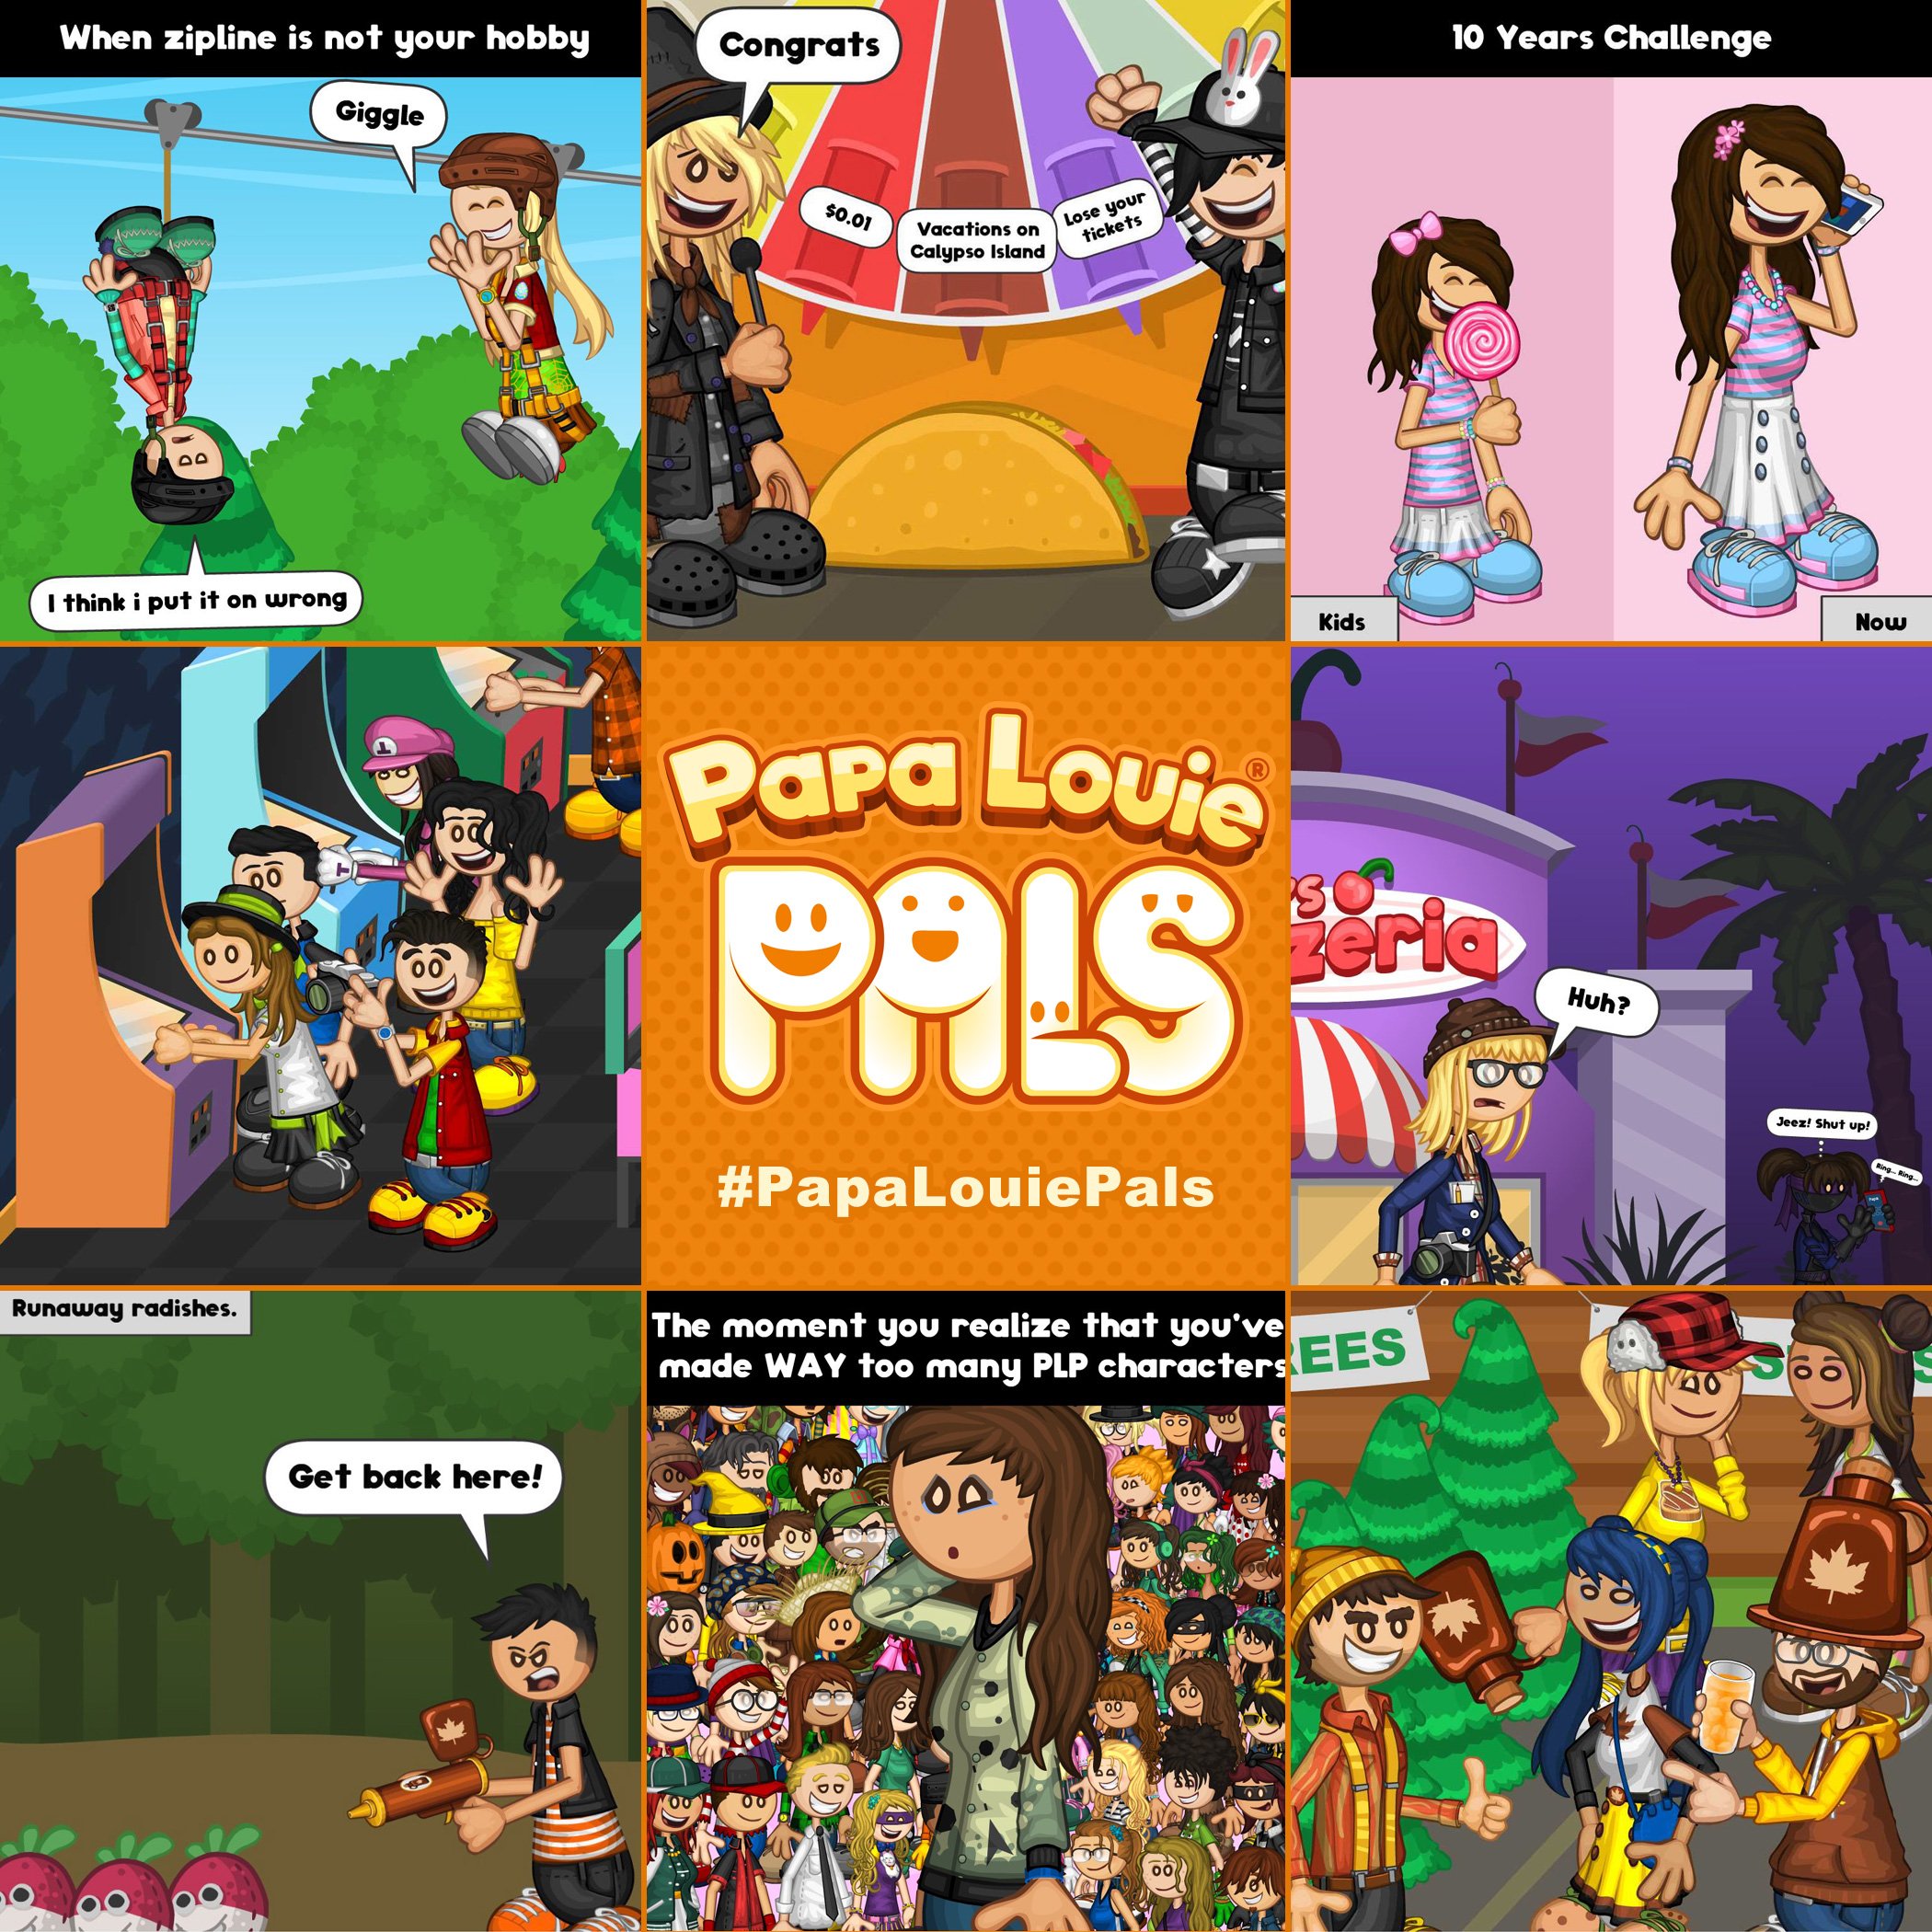 Papa Louie 3: Coming Out March 4th!!! « Preview « Flipline Studios Blog